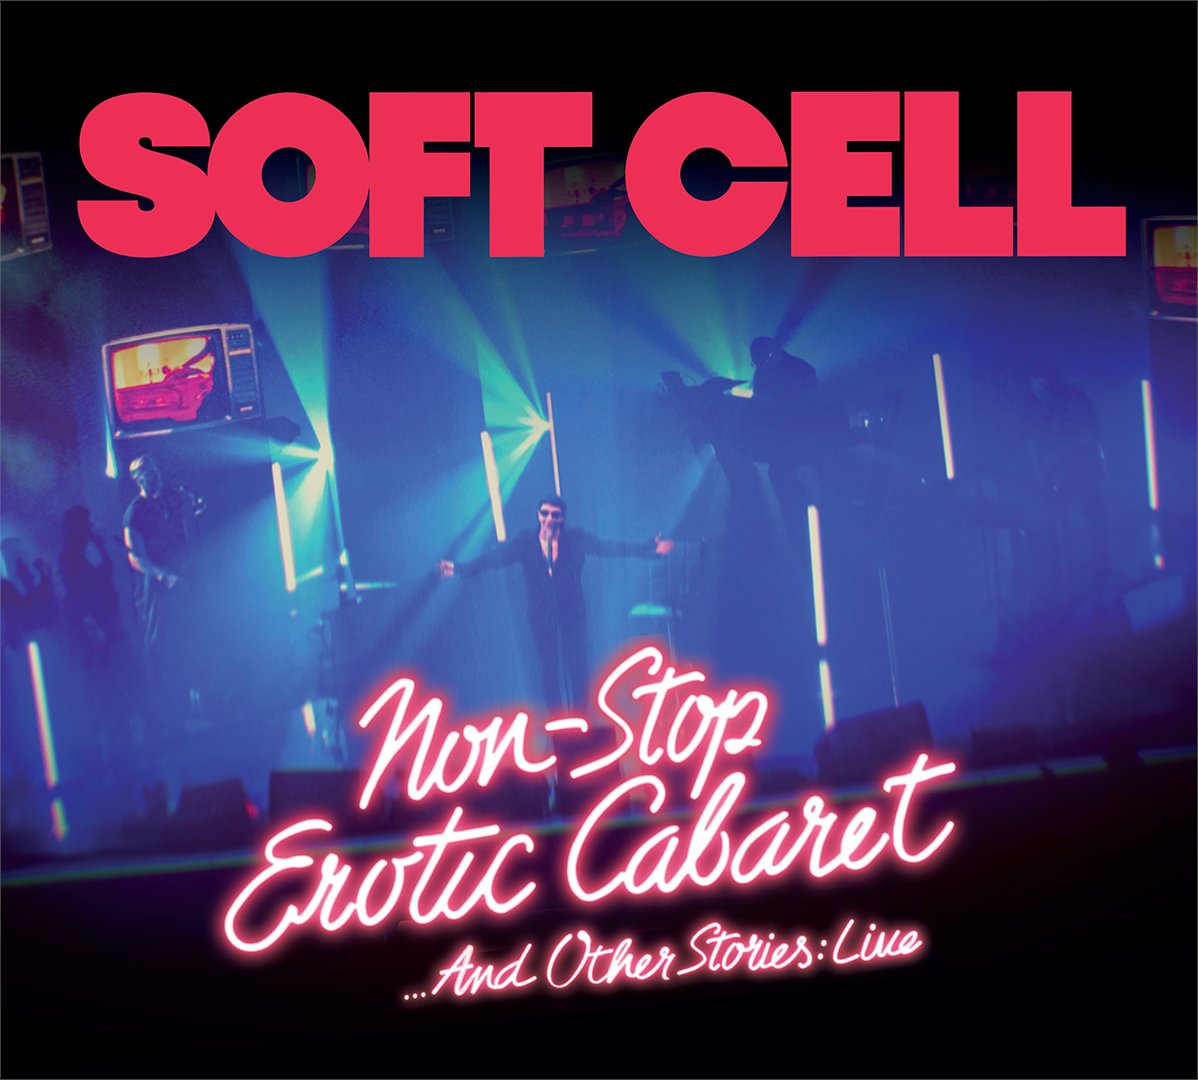 Soft Cell are delighted to confirm the new release date for ‘Non-Stop Erotic Cabaret…And Other Stories: Live’. The live album is now set to be released on CD & DVD on 14th April, w/ vinyl & Blu-ray formats & strictly-ltd super-collectable special editions to follow on 19th May.